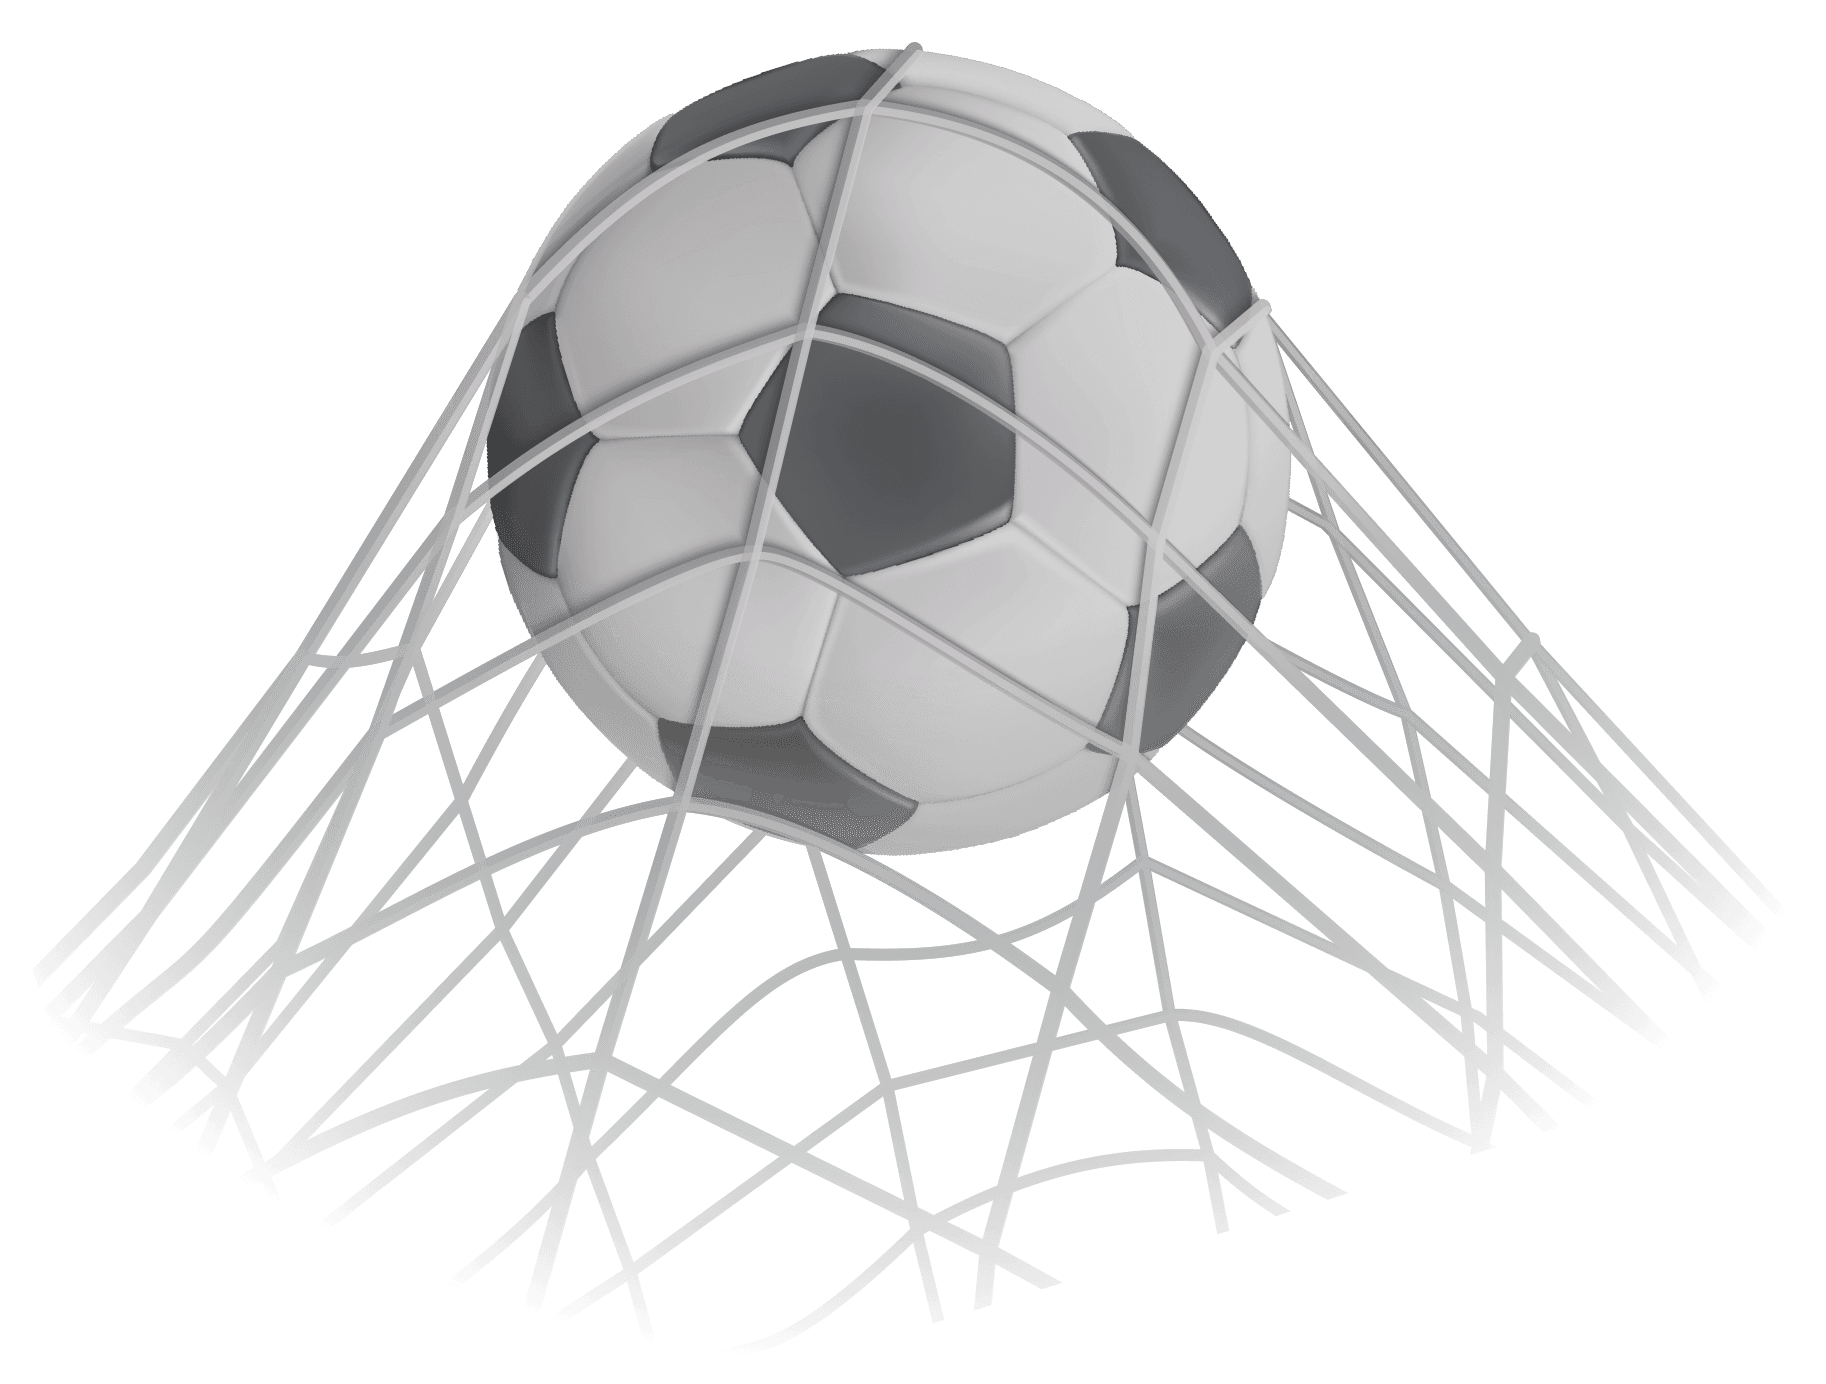 Football at the back of the net